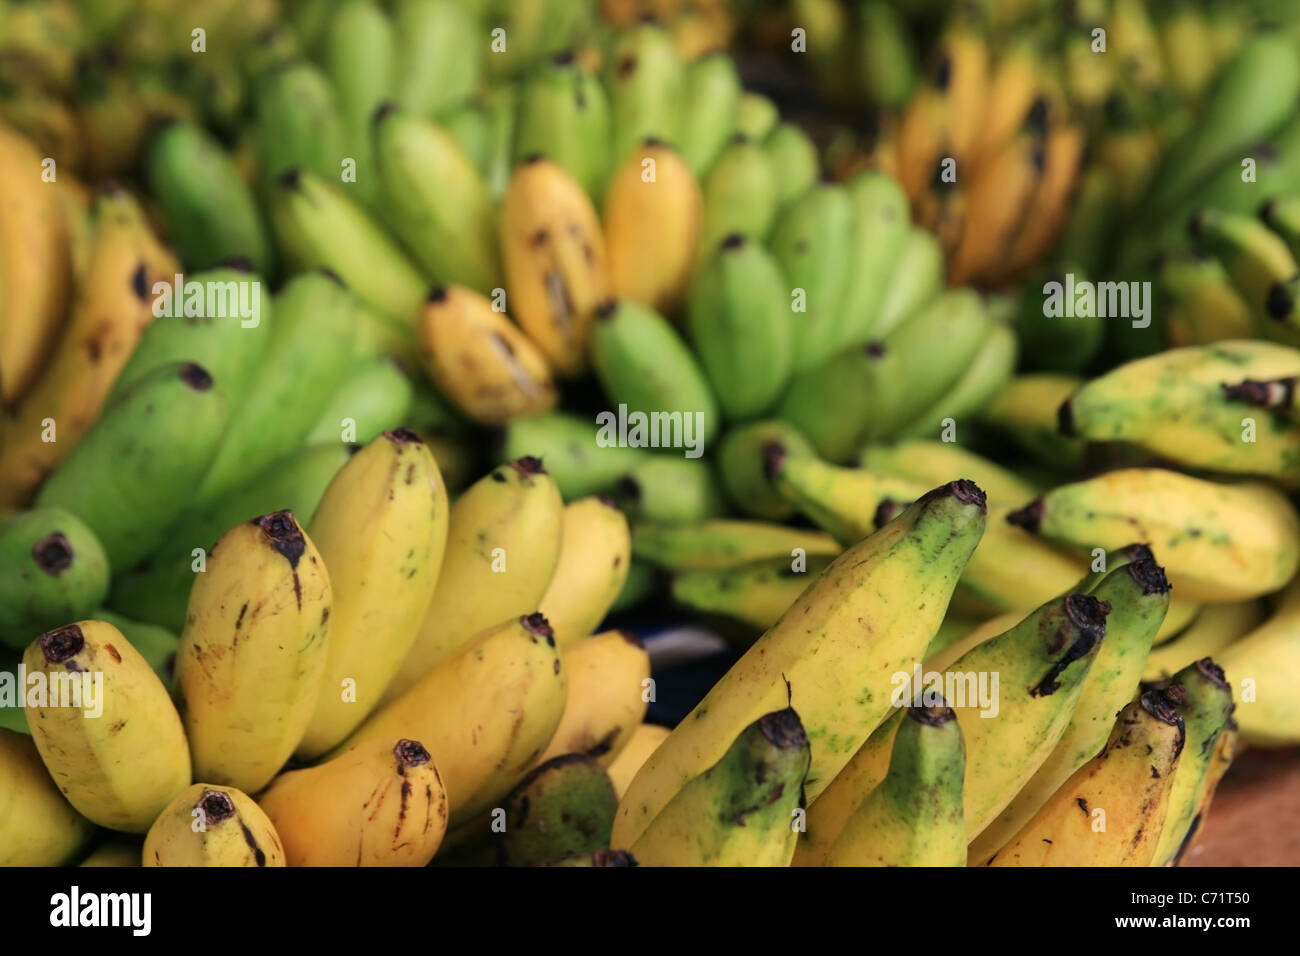 bunches of local bananas in a Thailand market Stock Photo